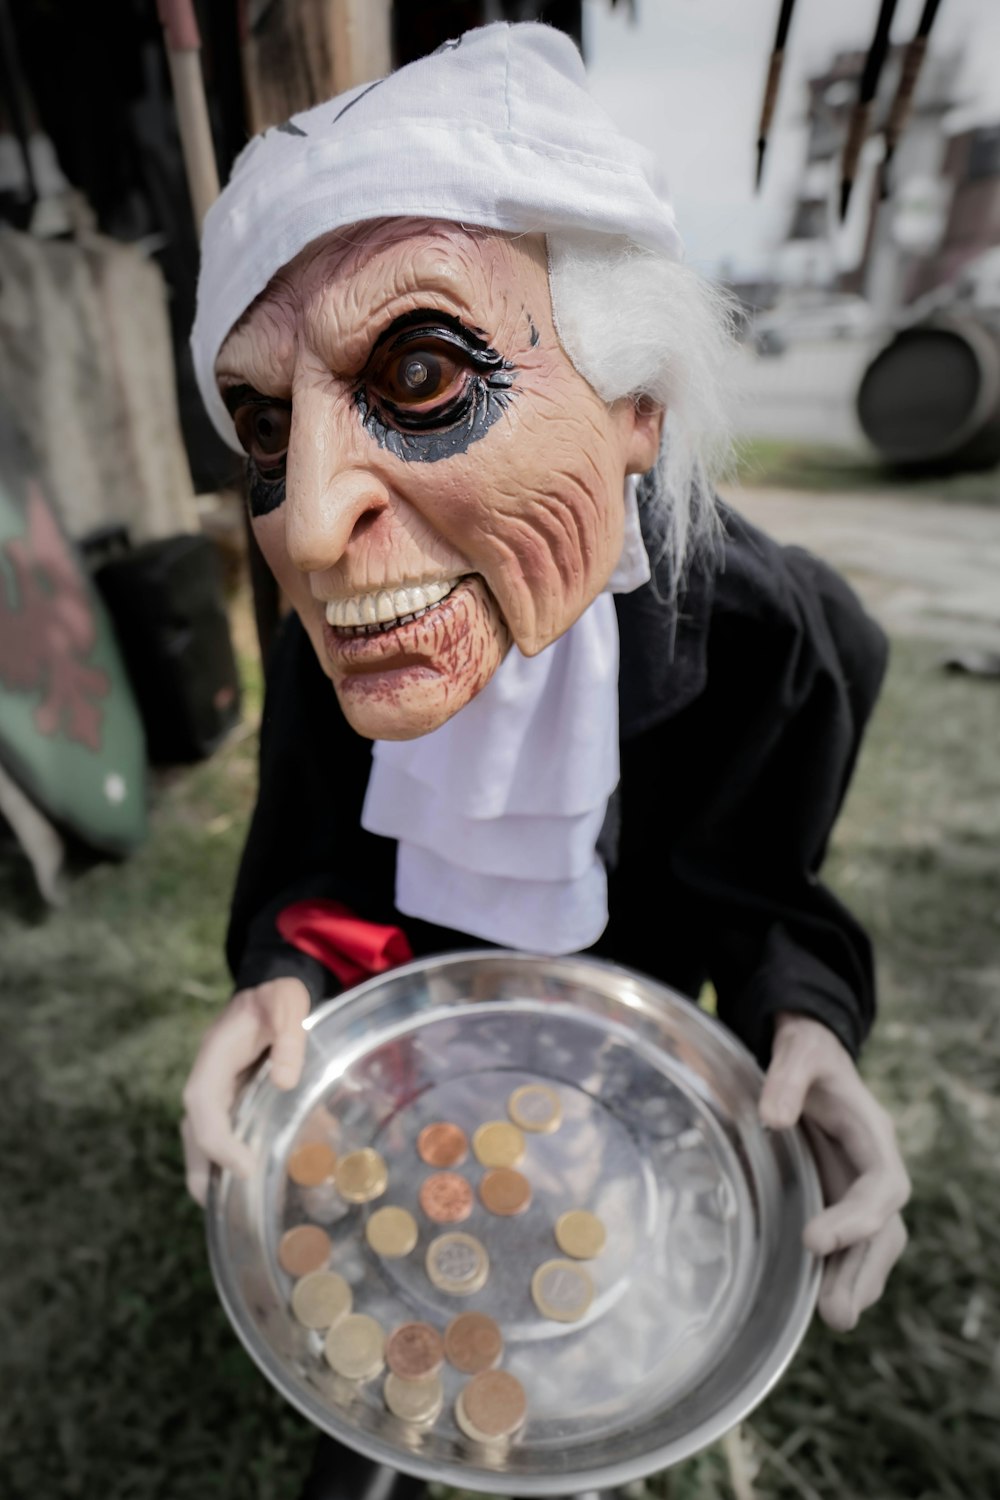 a person in a costume holding a tray of coins